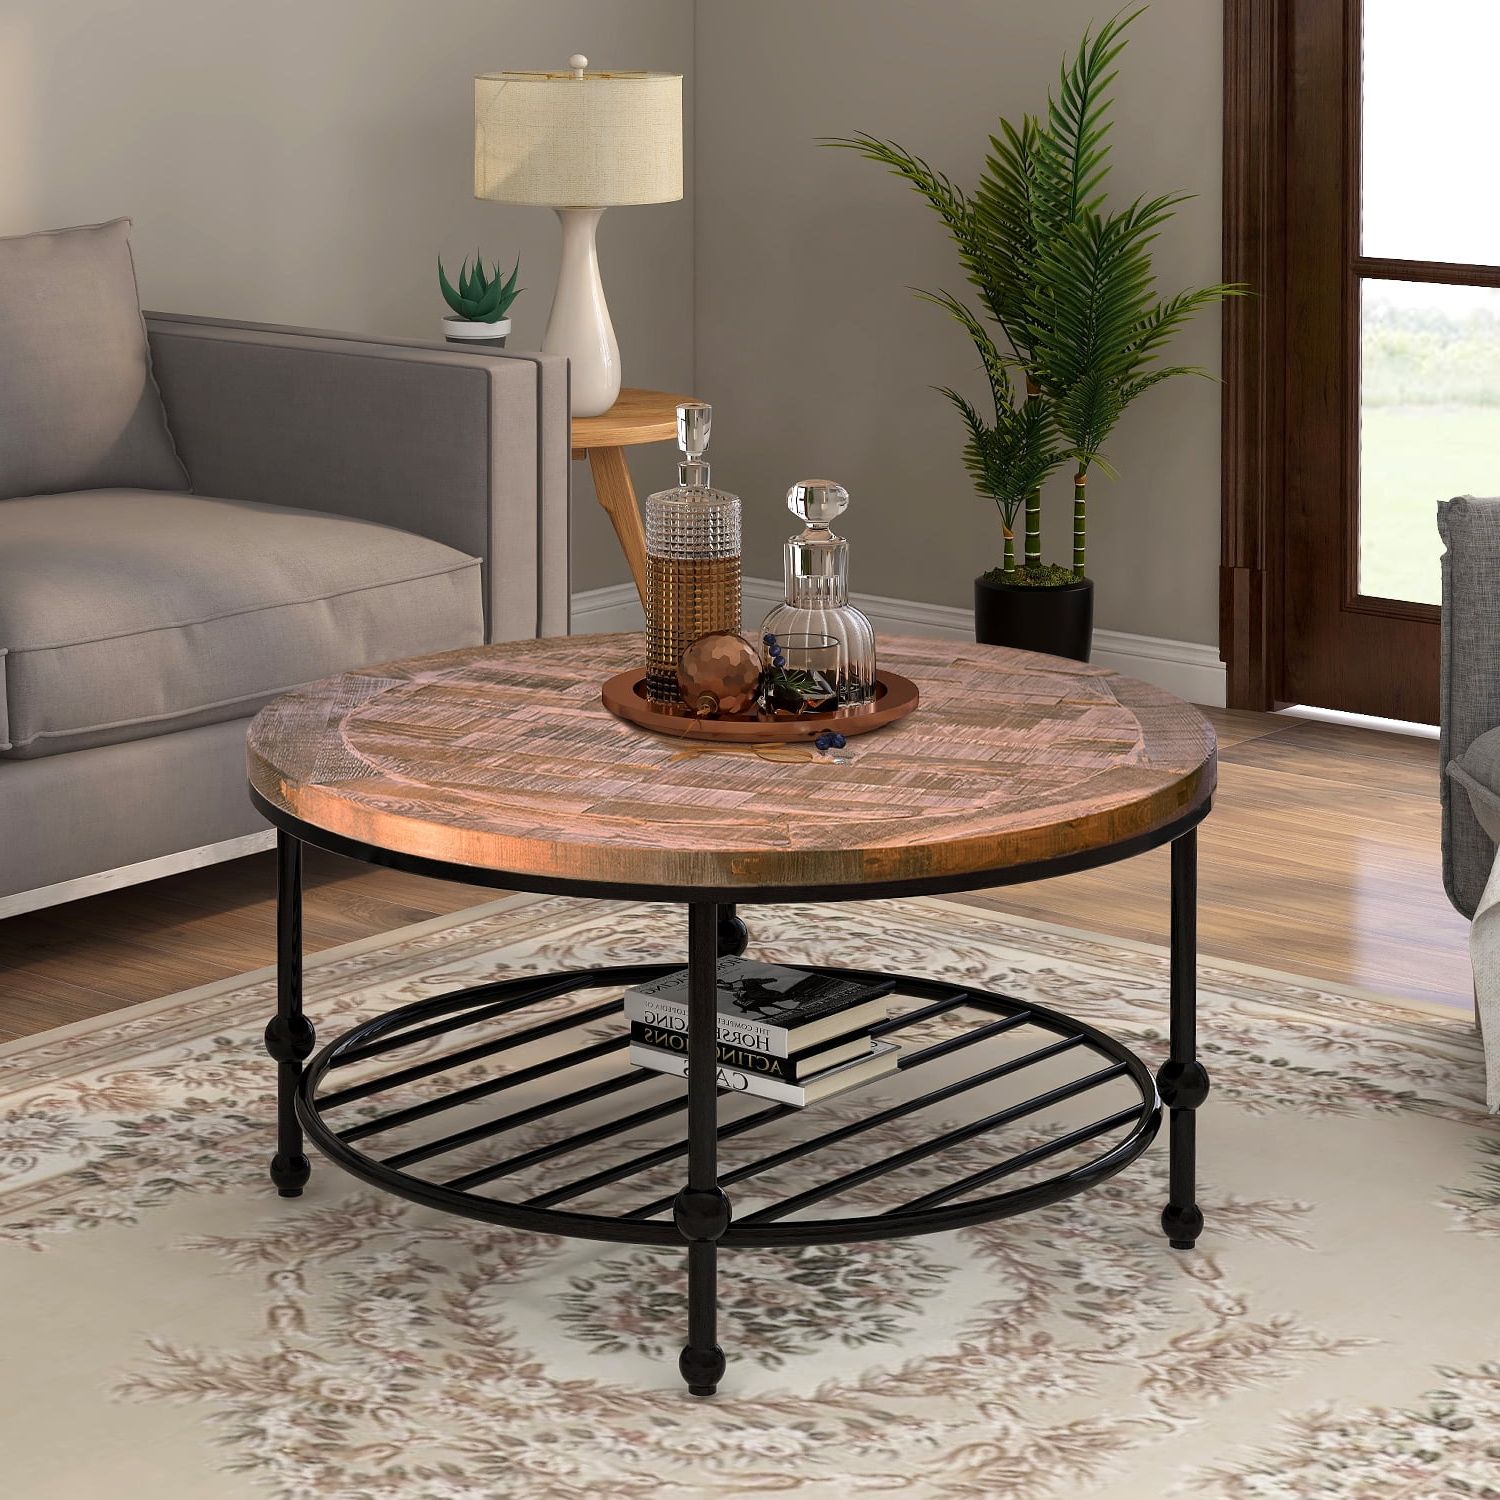 Most Recent Coffee Tables With Round Wooden Tops For Rustic Natural Round Coffee Table With Storage Shelf For Living Room (View 6 of 15)